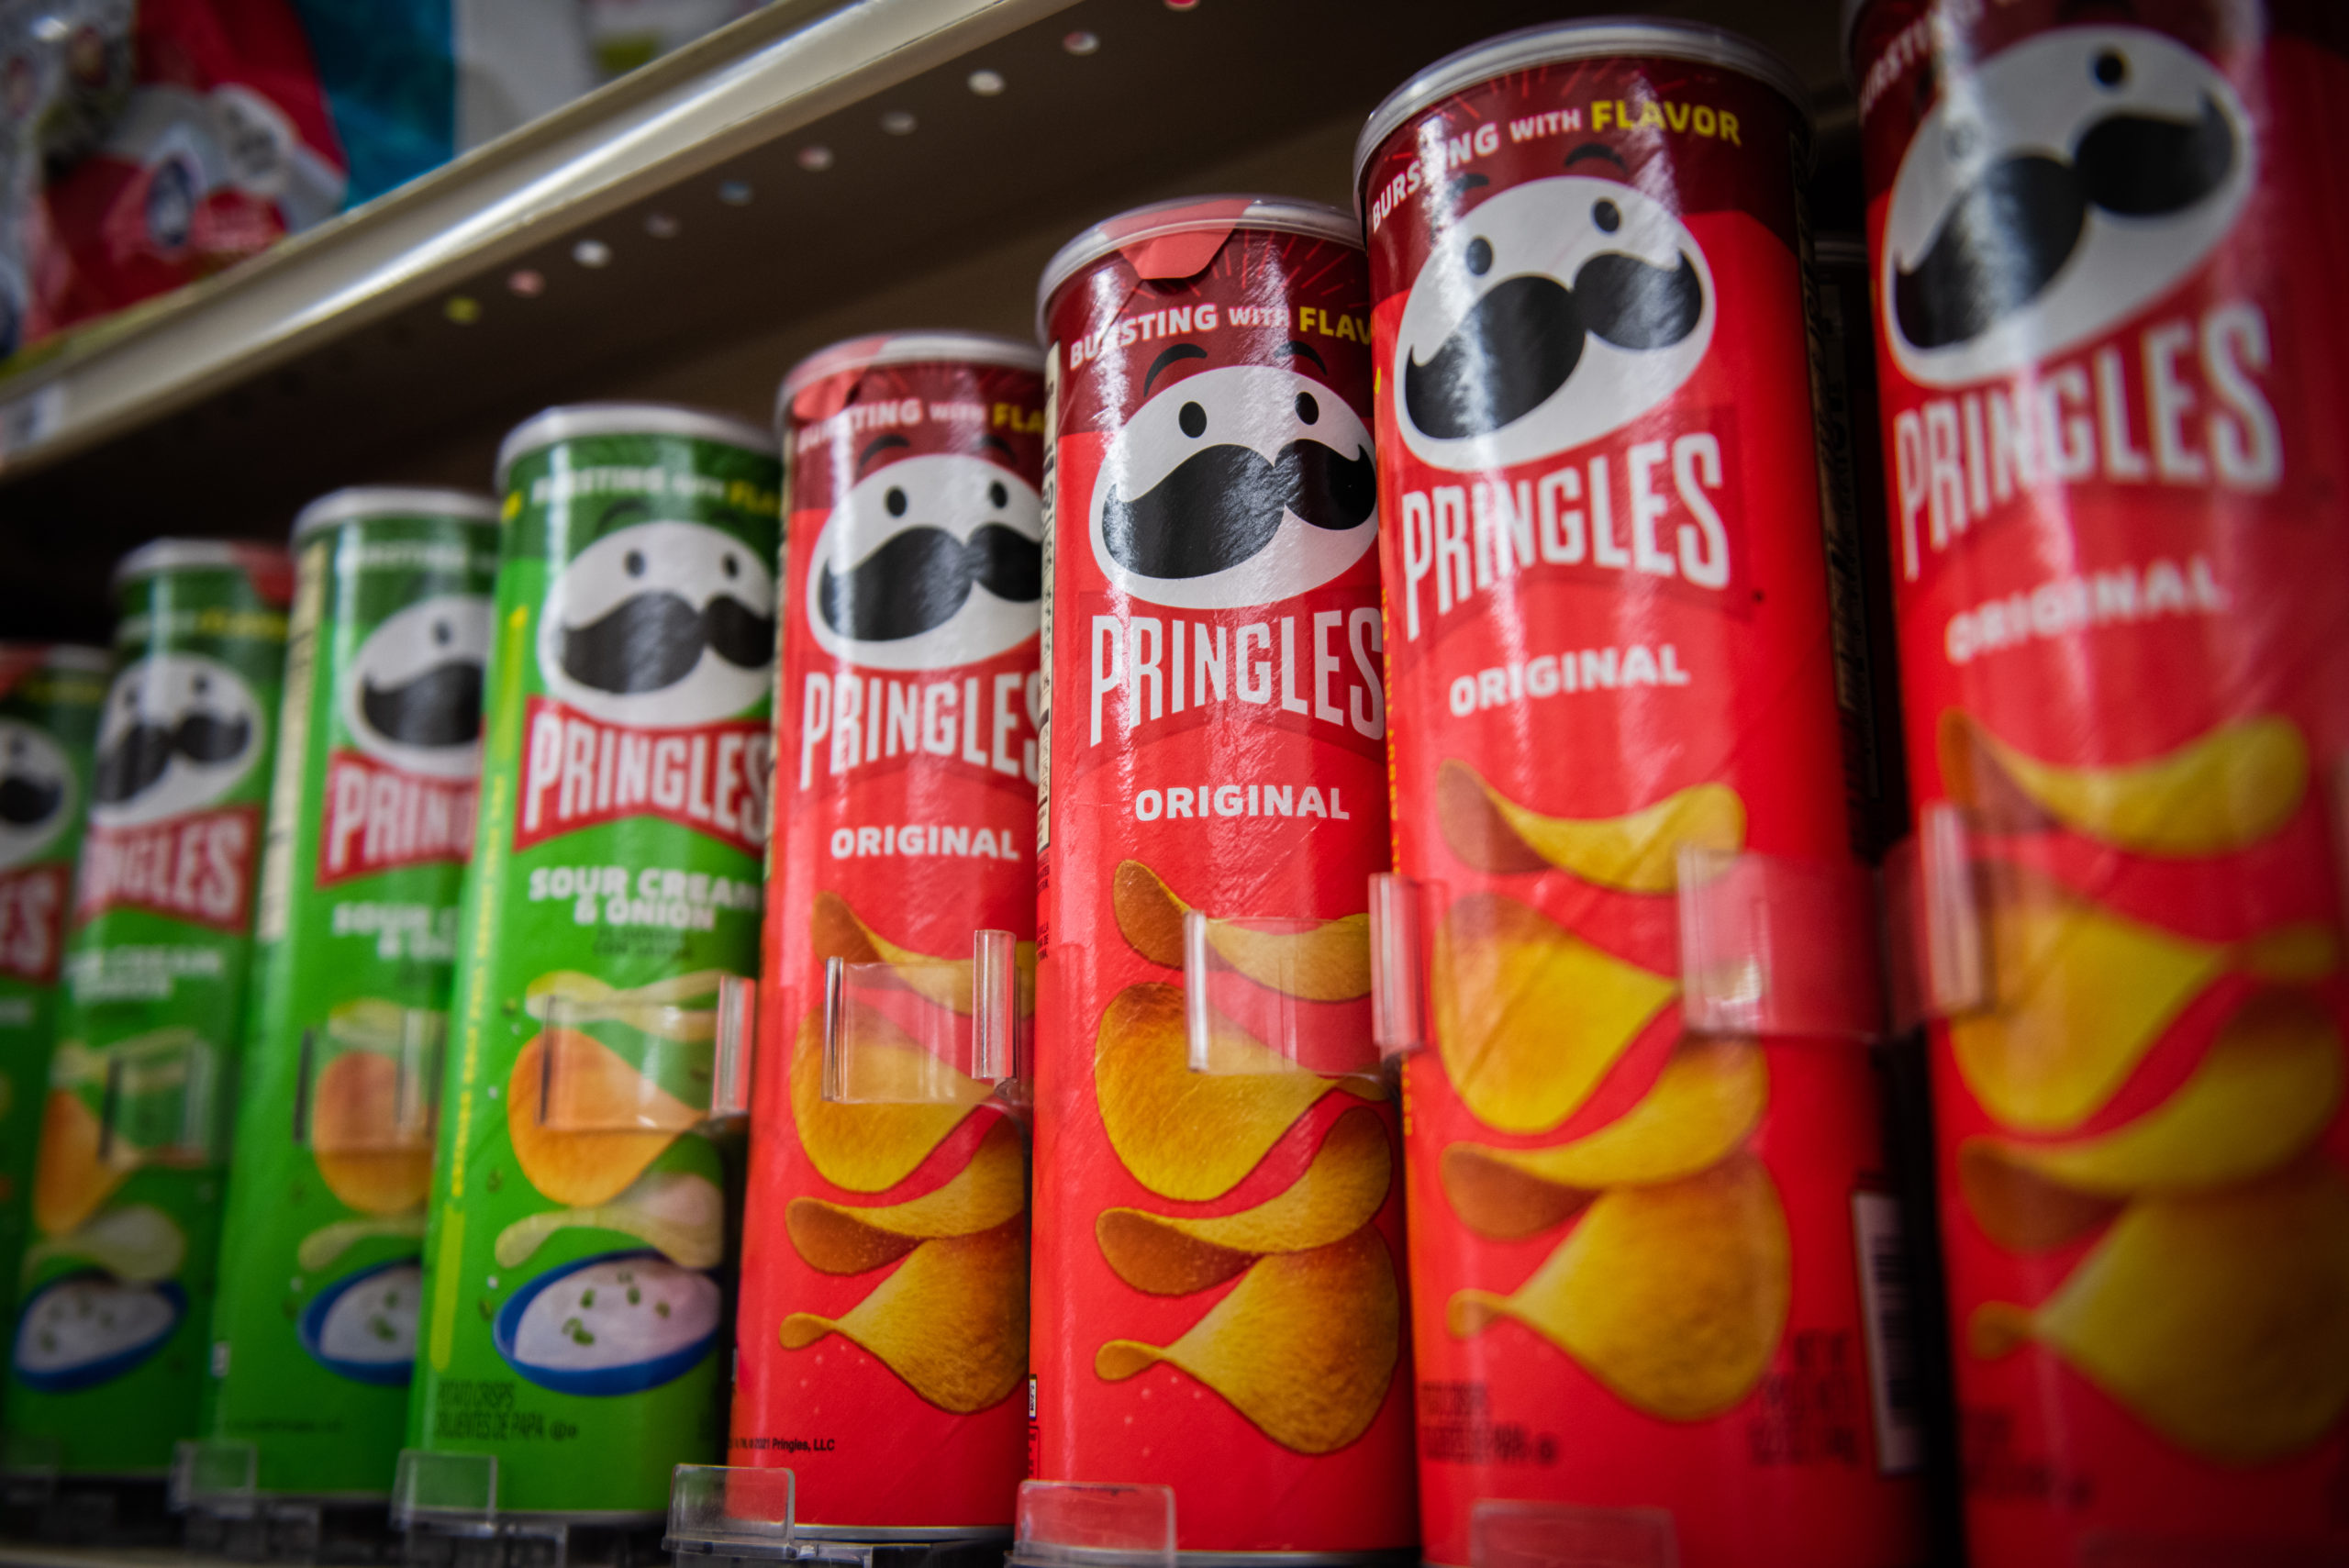 Pringles wants a spider named after it. (No, we don't quite get it either.)